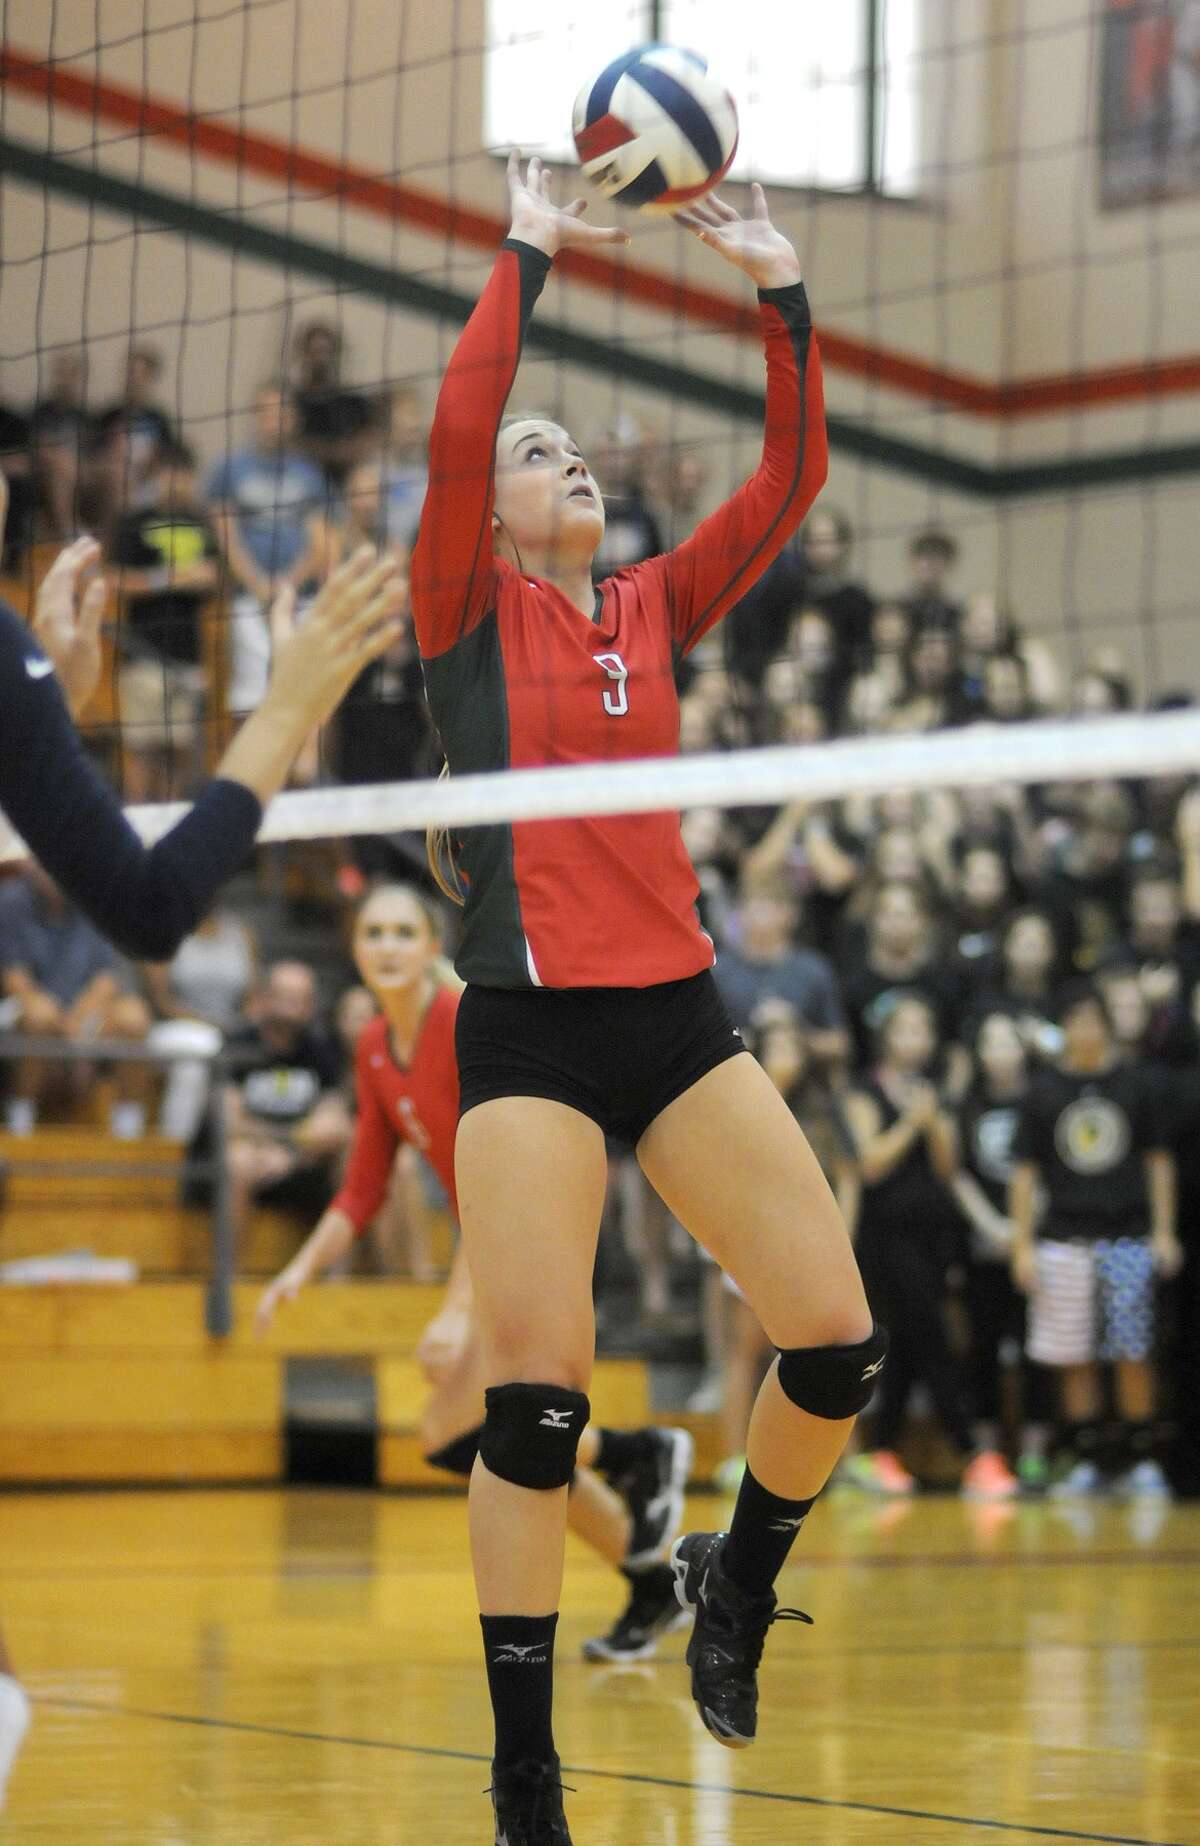 The Woodlands senior setter Courtney Eckenrode makes a play versus College Park.